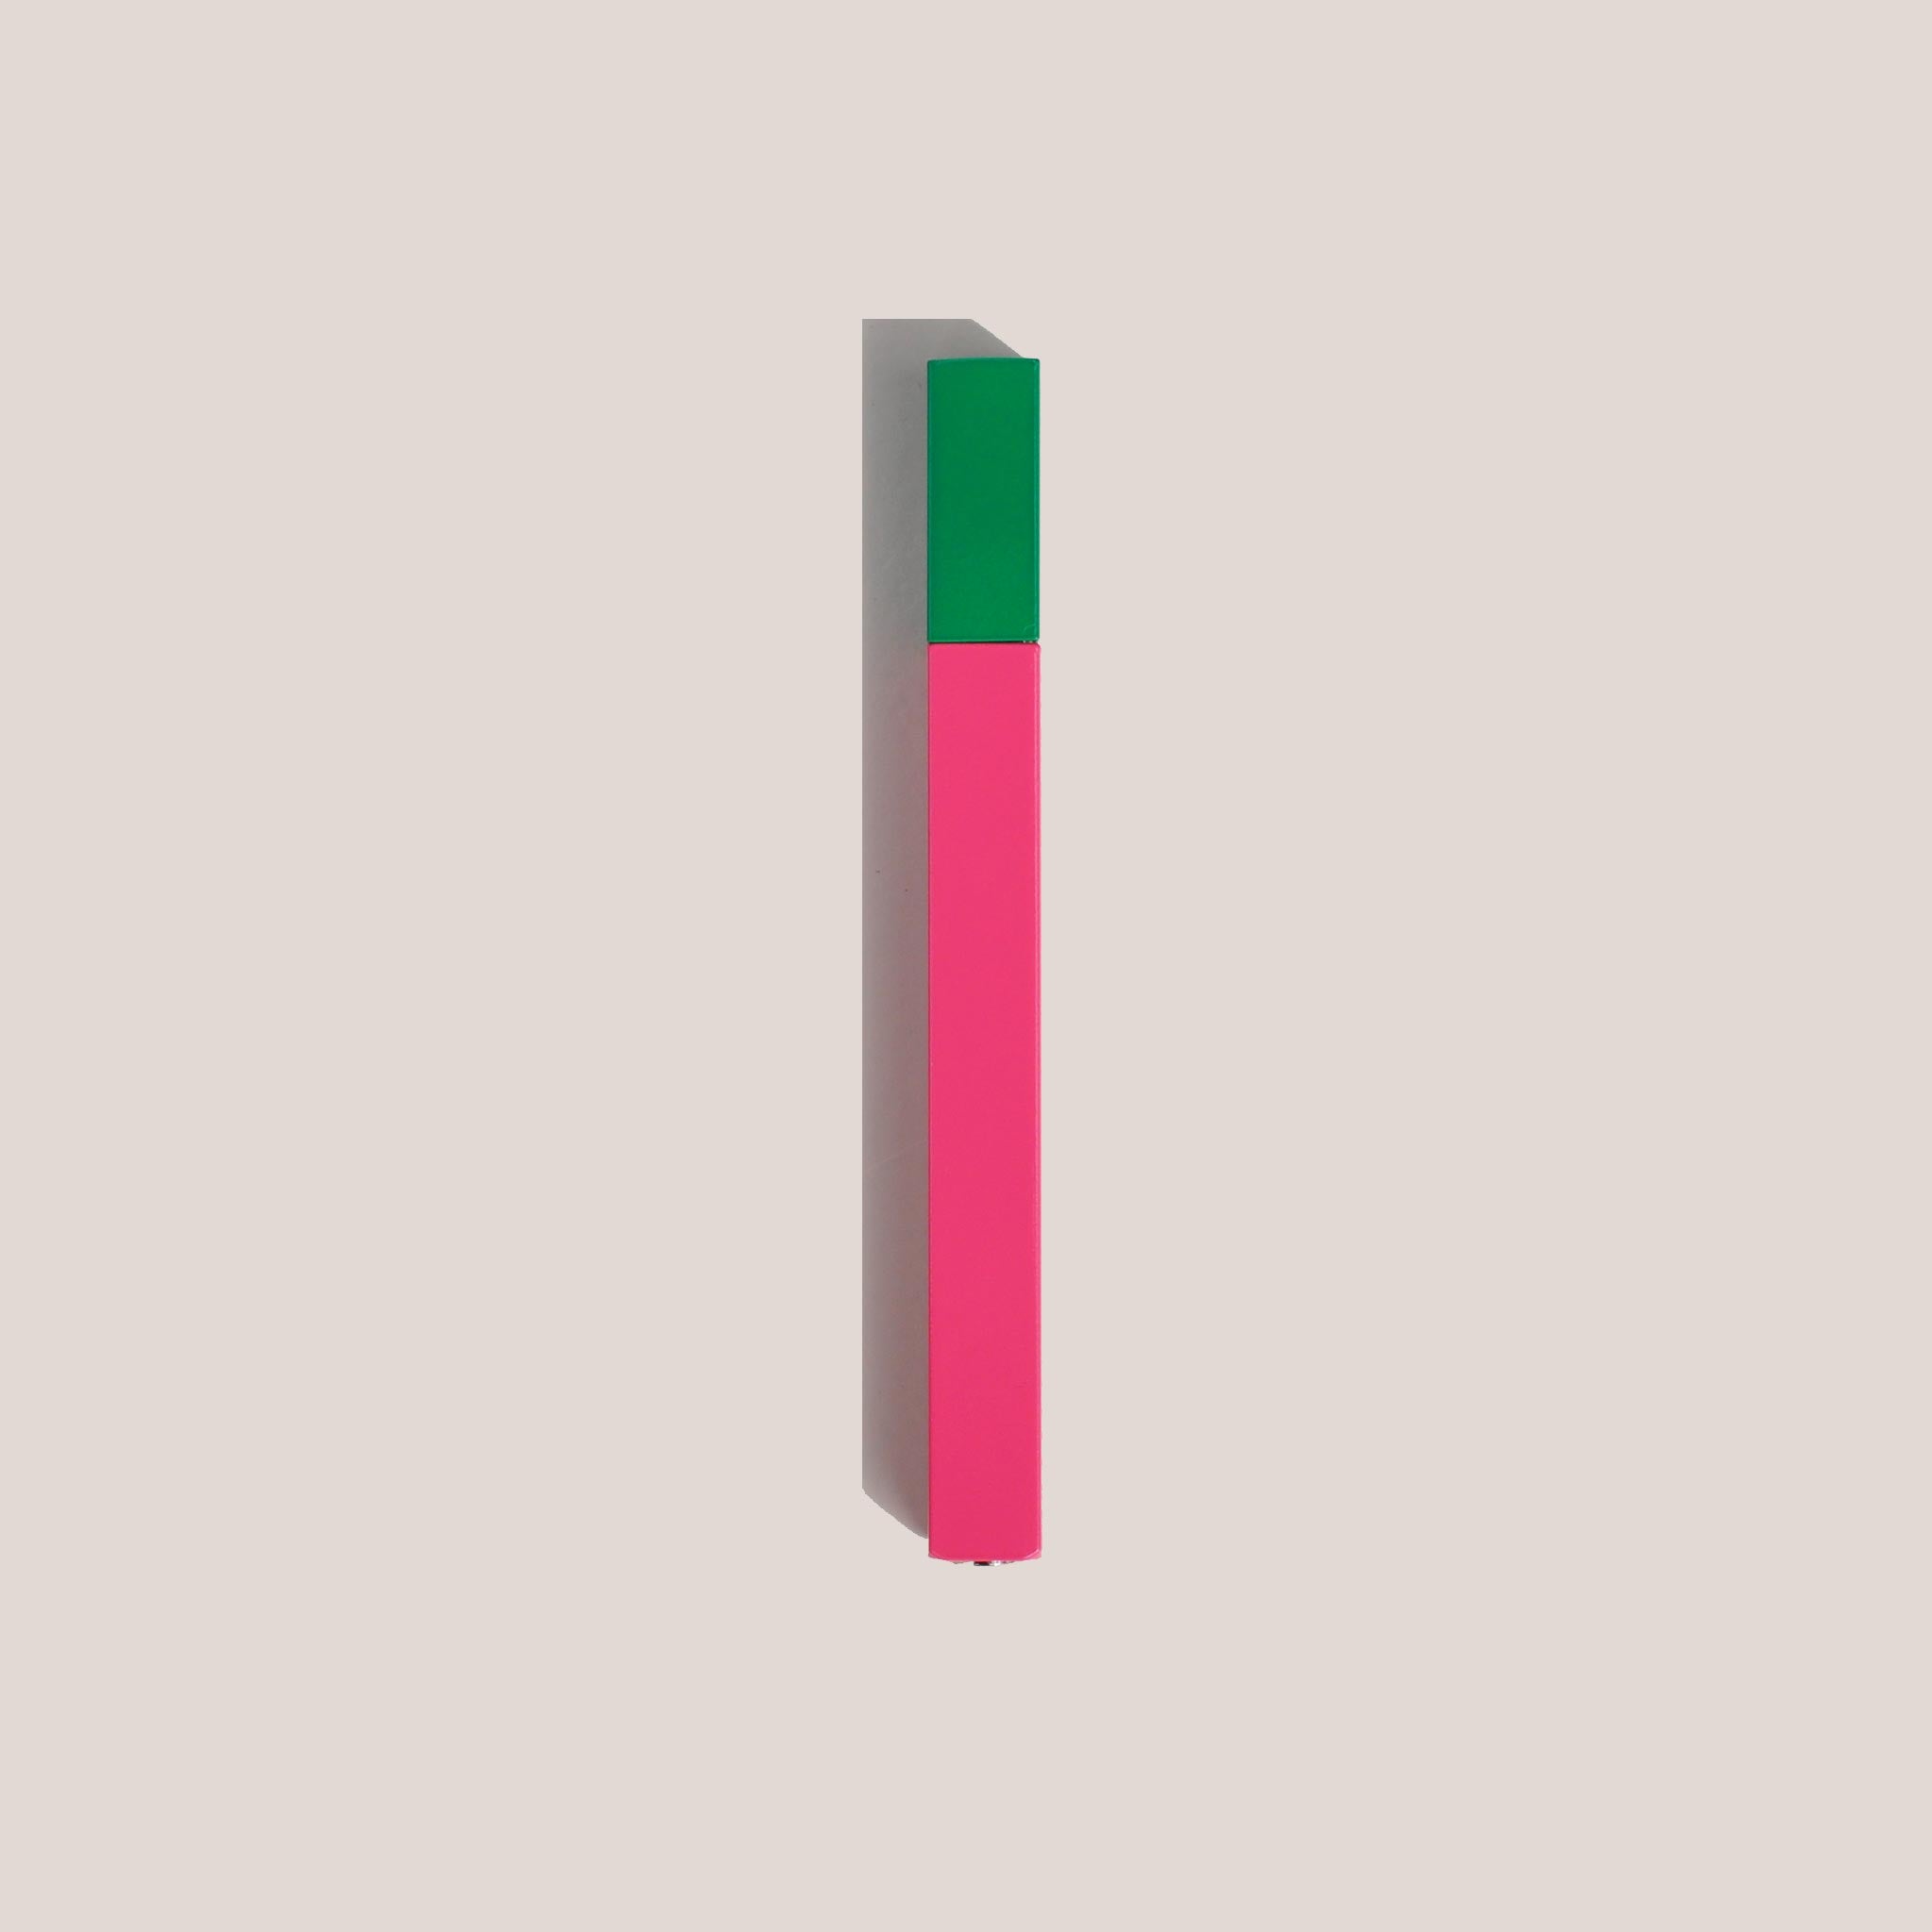 Tsubota Pearl - Queue Stick Lighter - Pink / Green, available at LCD.